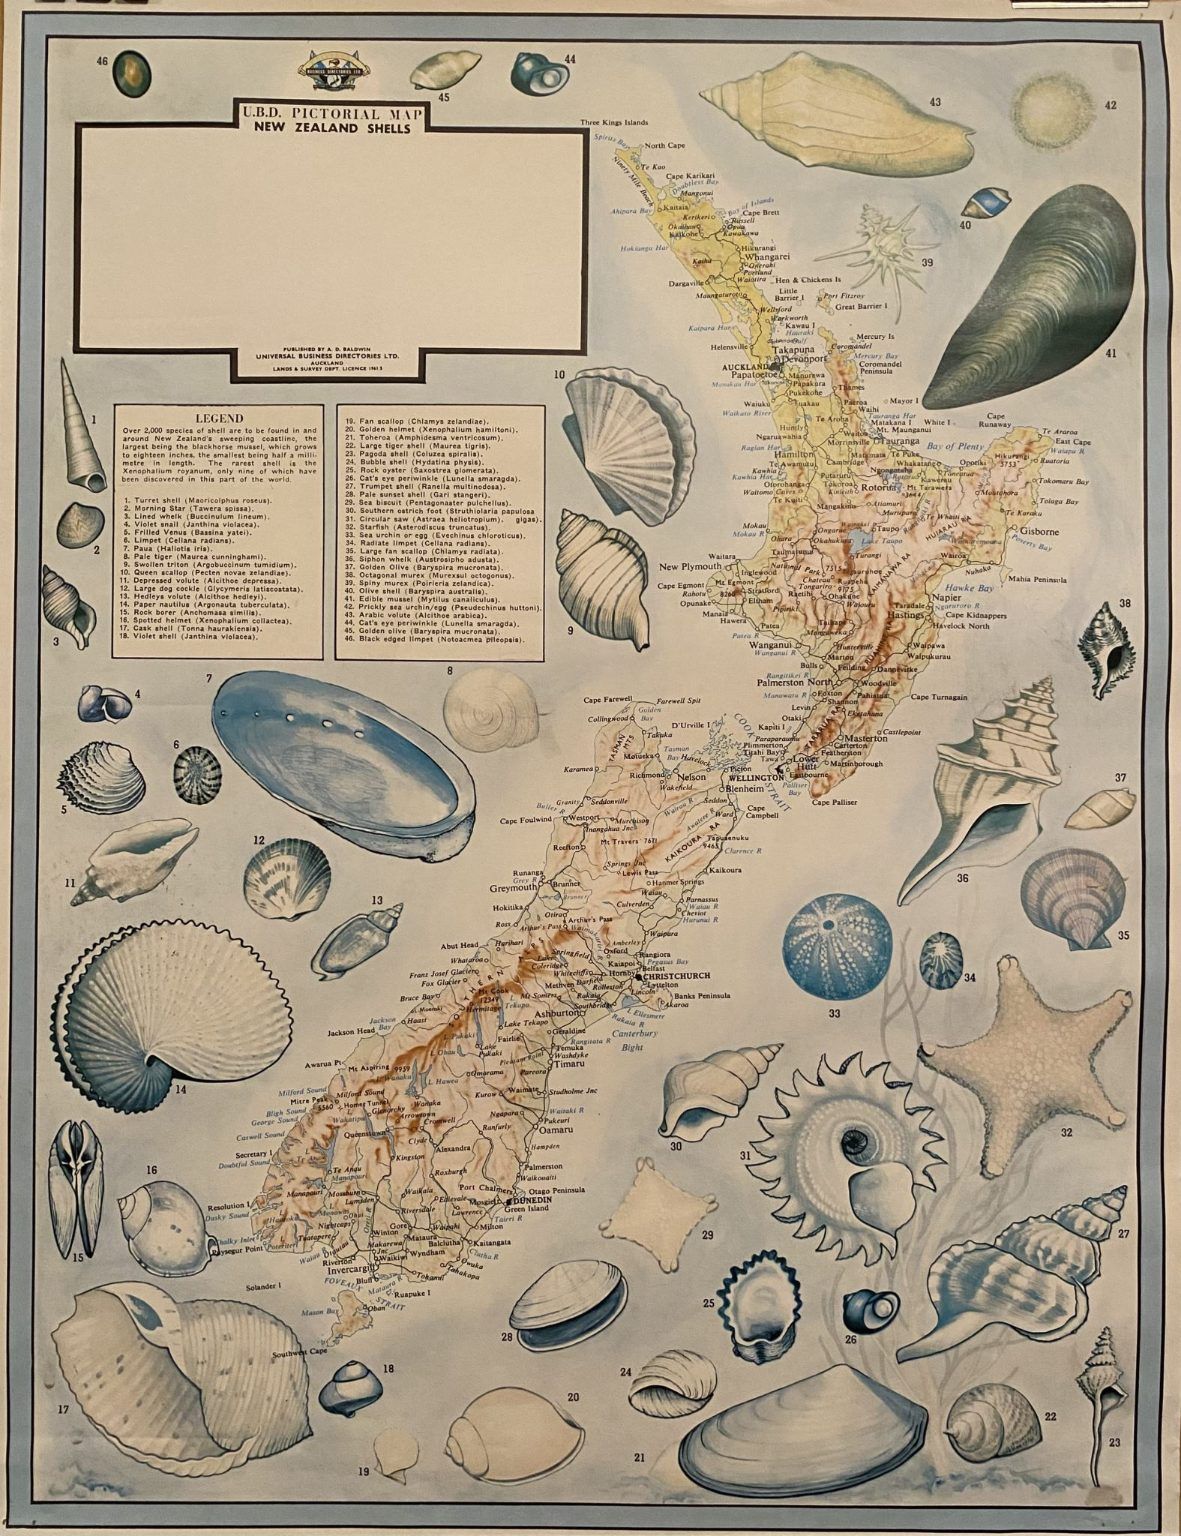 VINTAGE POSTER: UBD Pictorial Map of New Zealand Shells